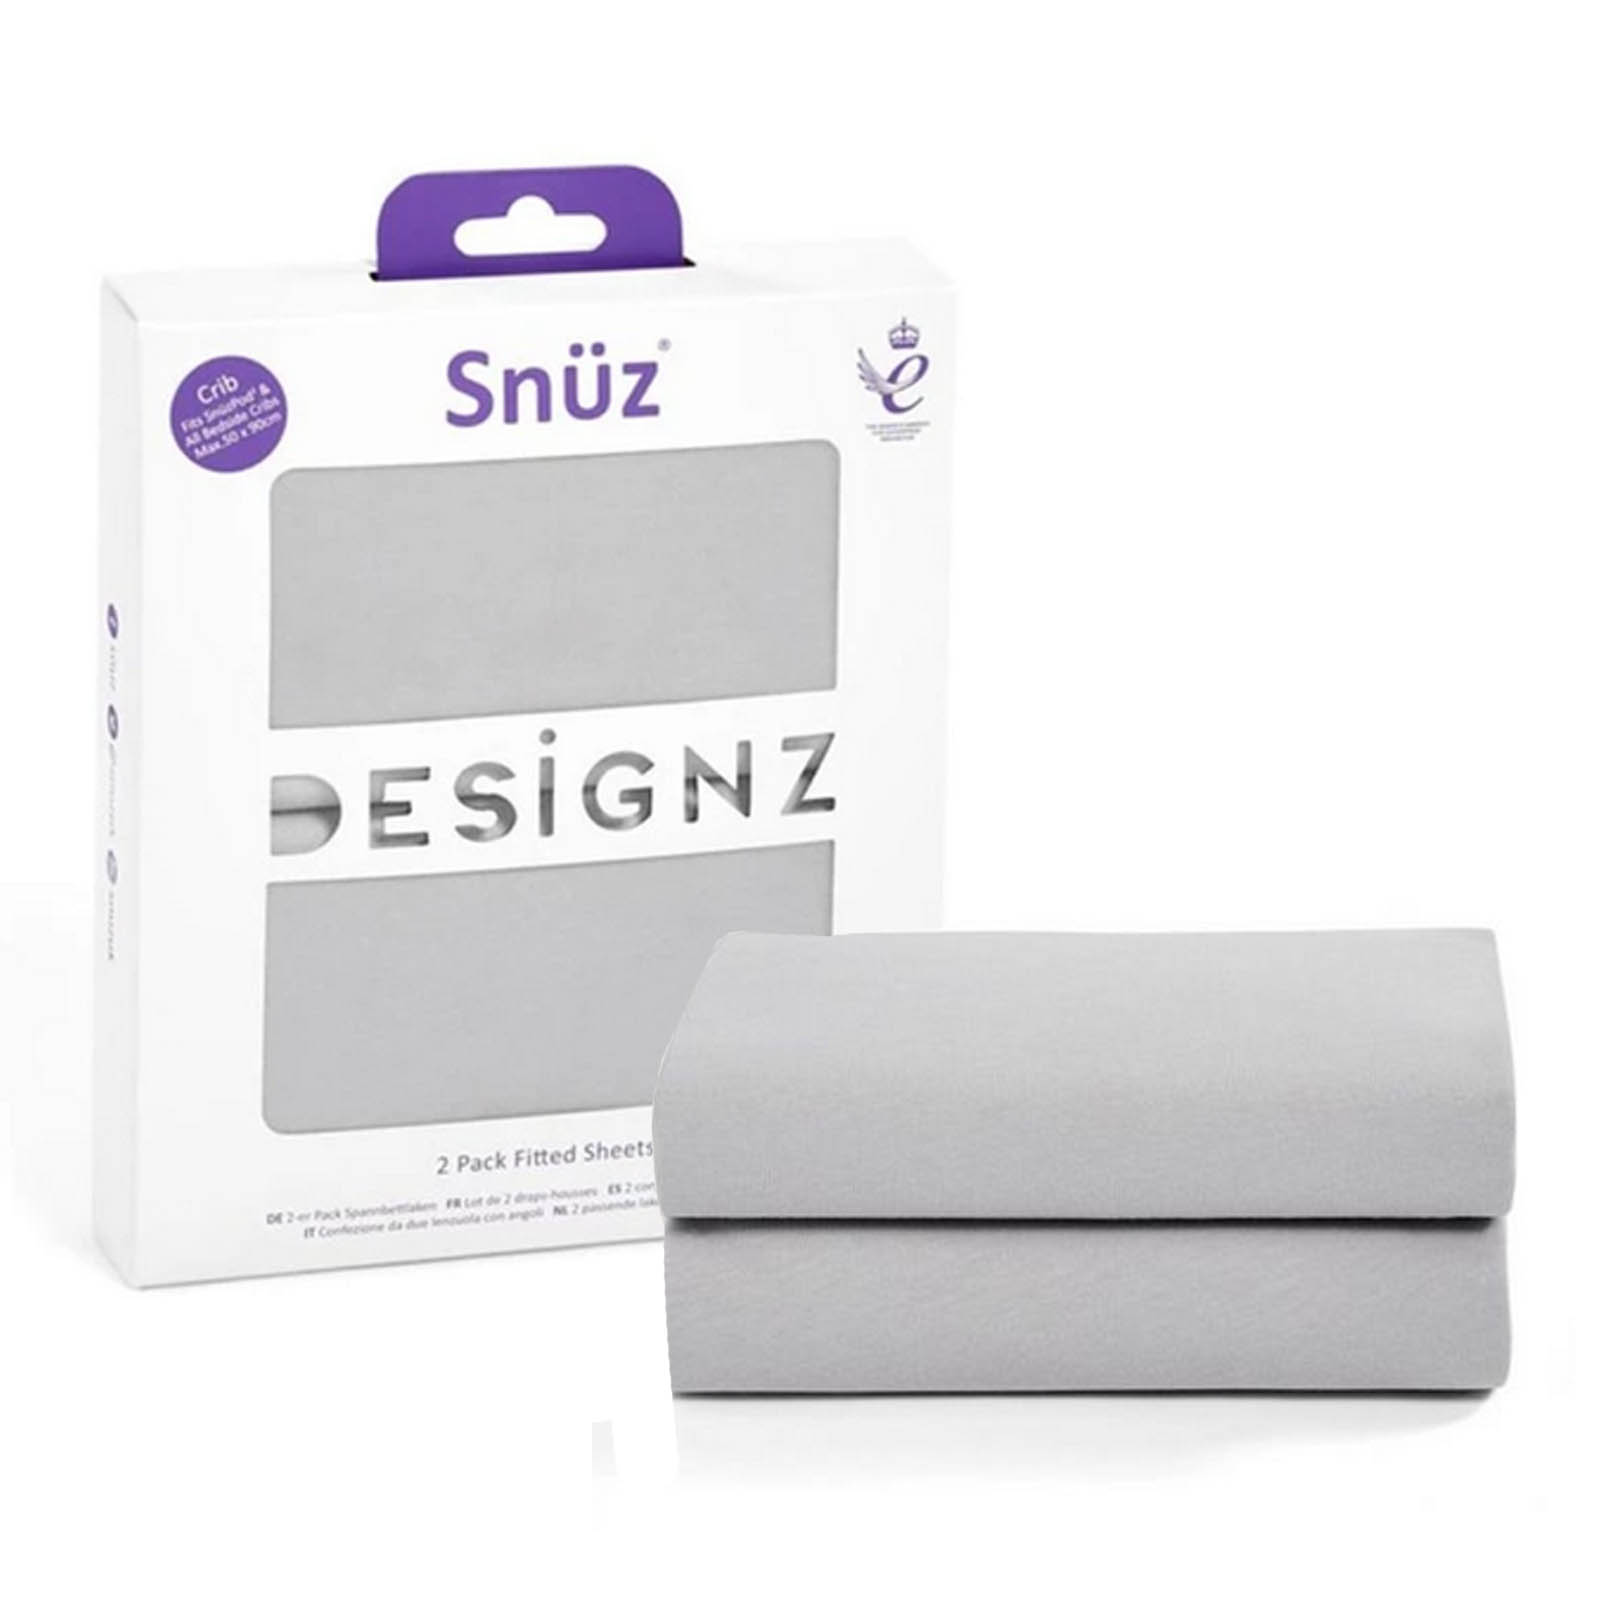 Snuz Crib Fitted Sheets (2 Pack) - Grey